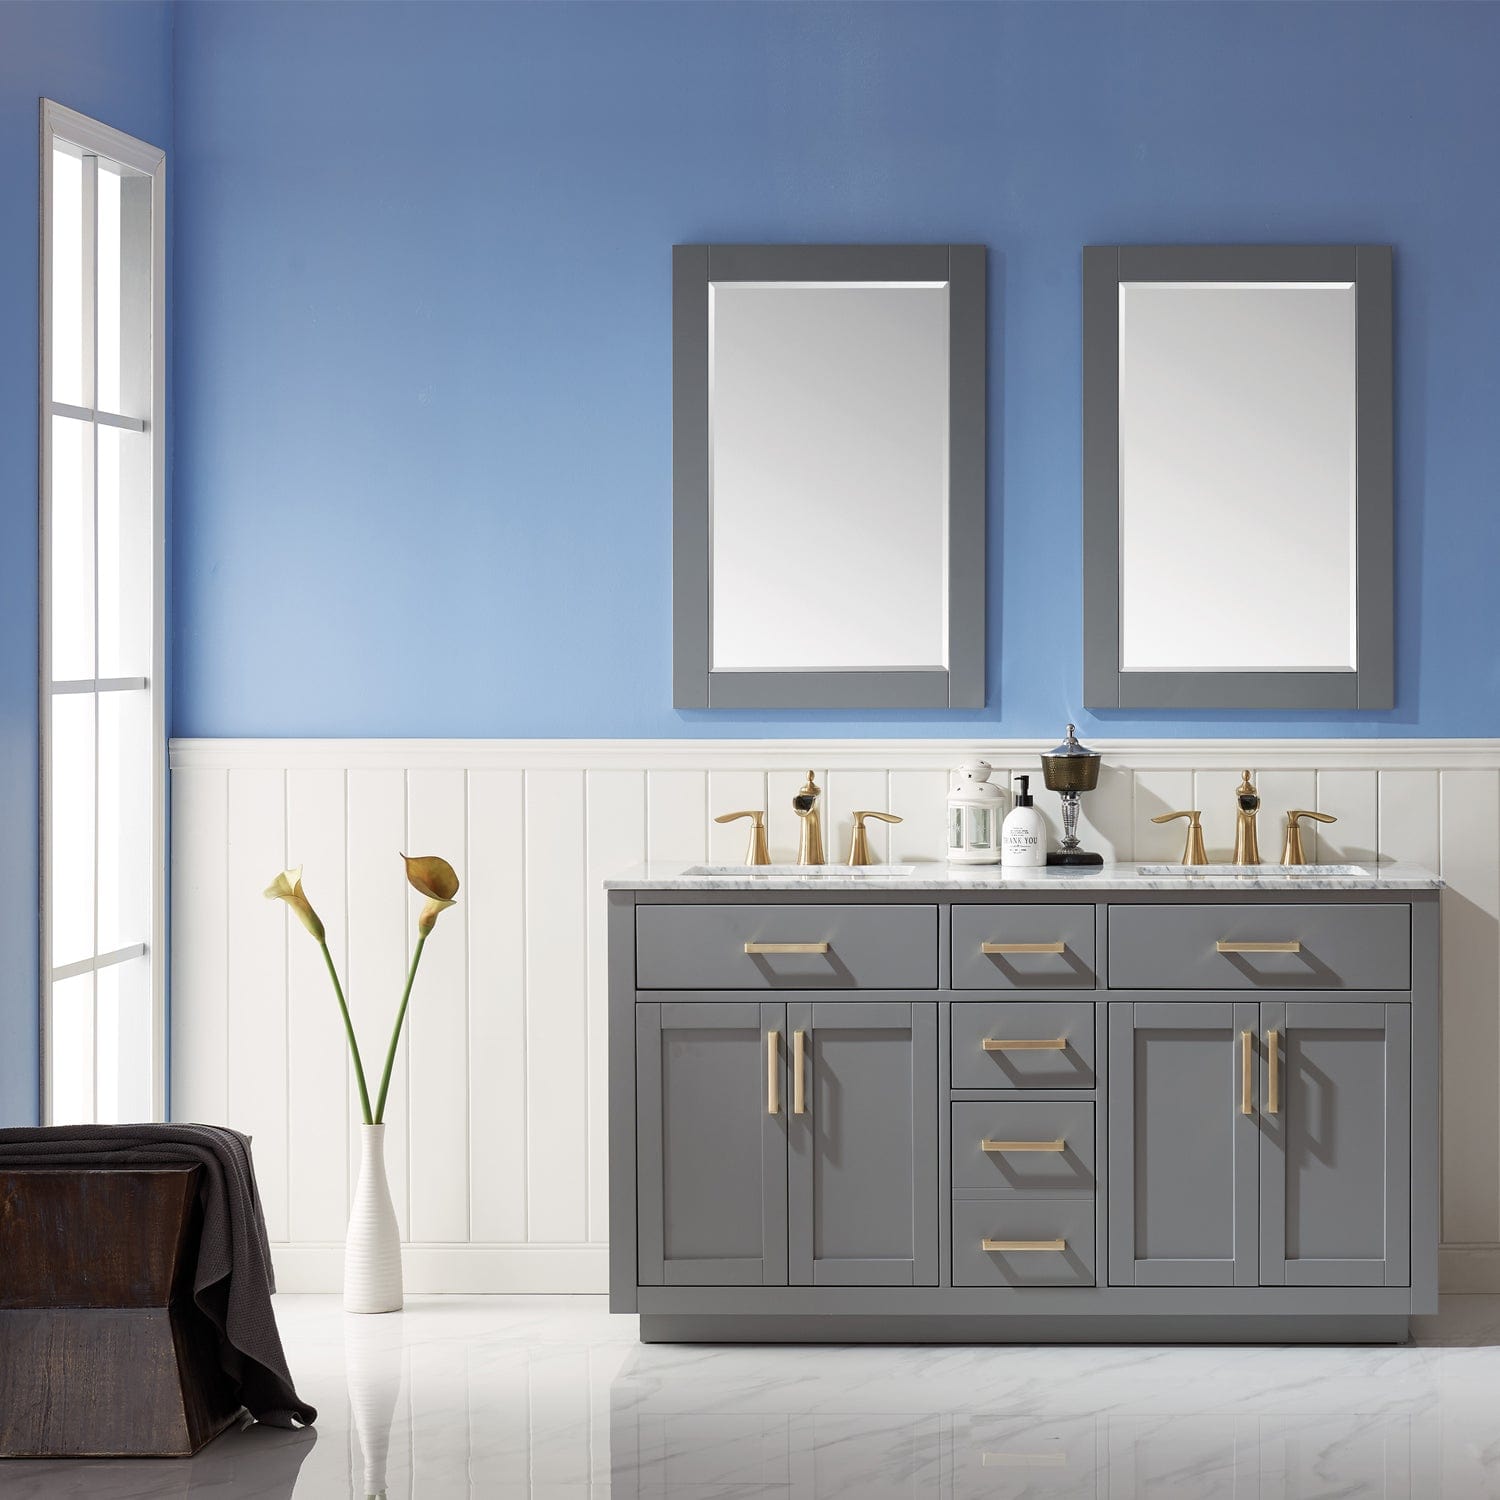 Altair Ivy 60" Double Bathroom Vanity Set in Gray and Carrara White Marble Countertop with Mirror 531060-GR-CA - Molaix631112971218Vanity531060-GR-CA